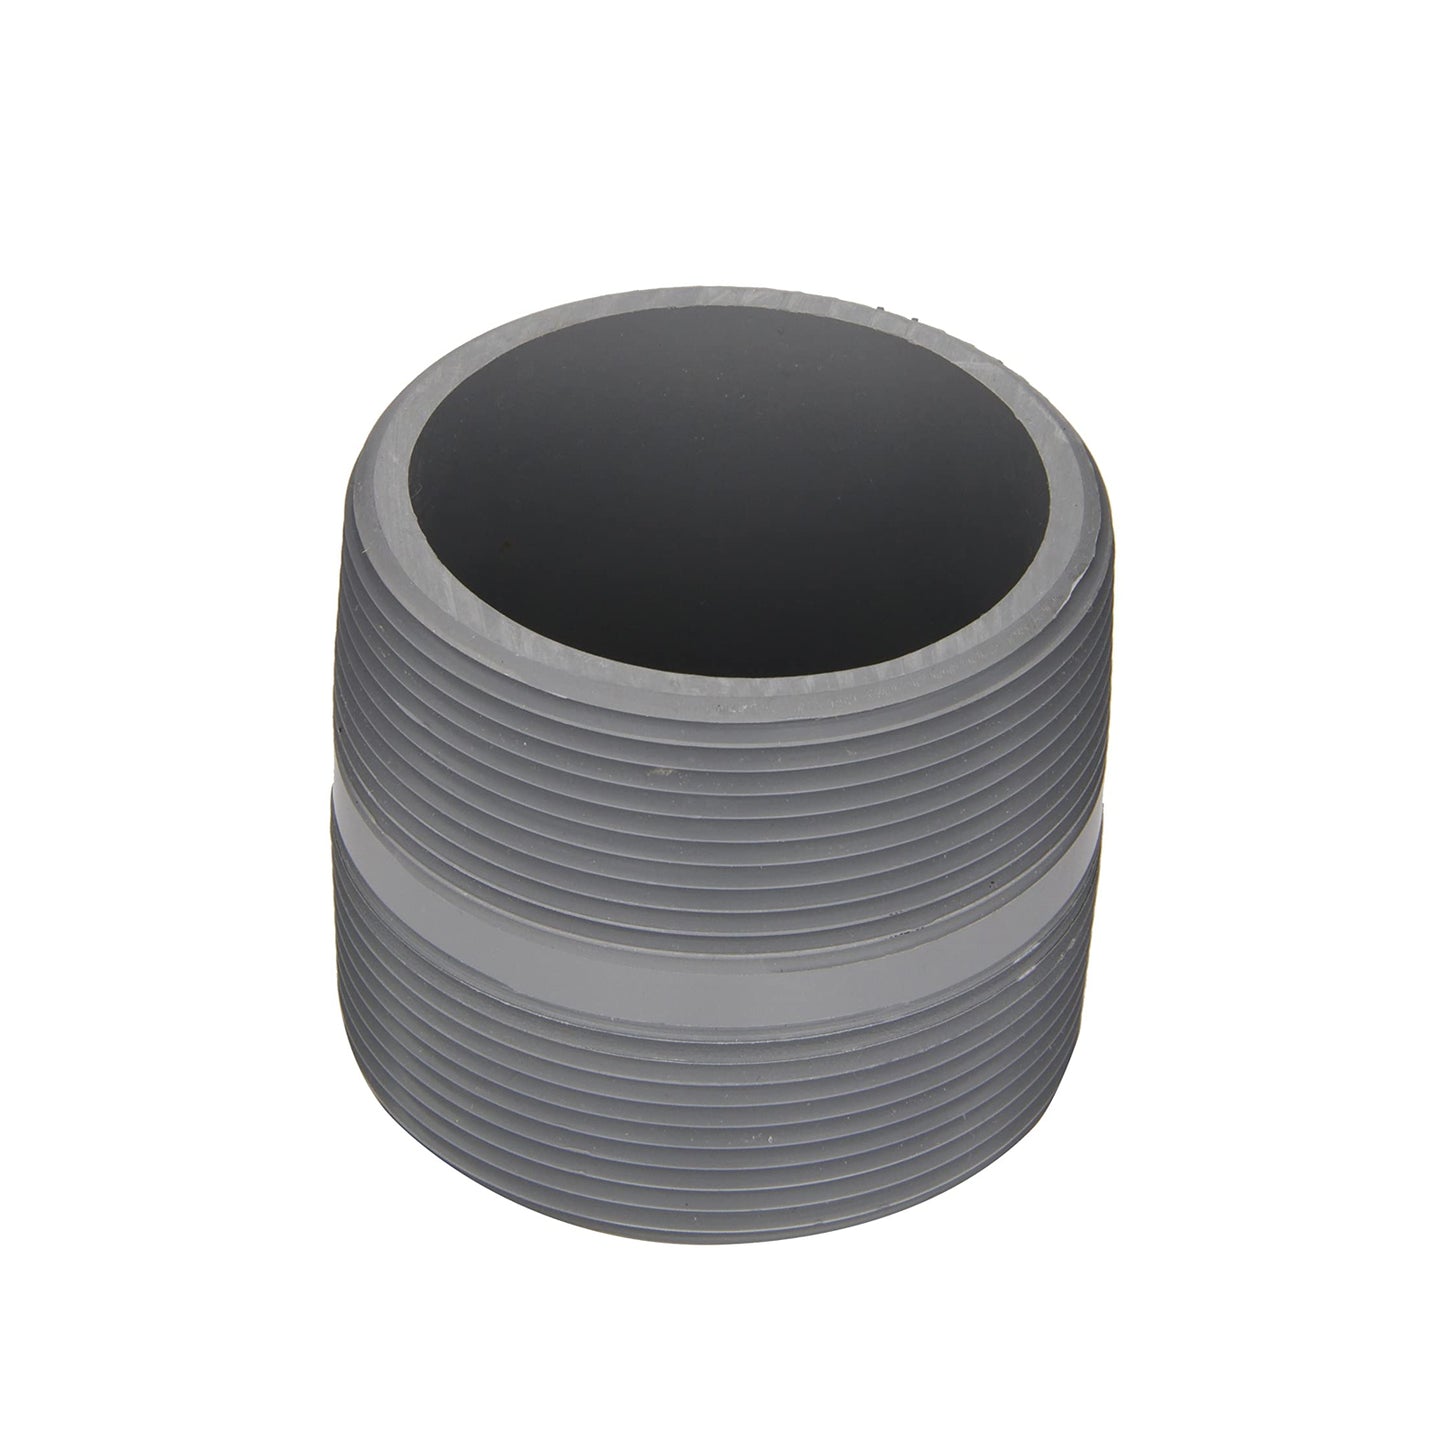 Spears 886-040C - CPVC Pipe Fitting, Nipple, Schedule 80, Gray, 1-1/2" NPT Male, 4" Length